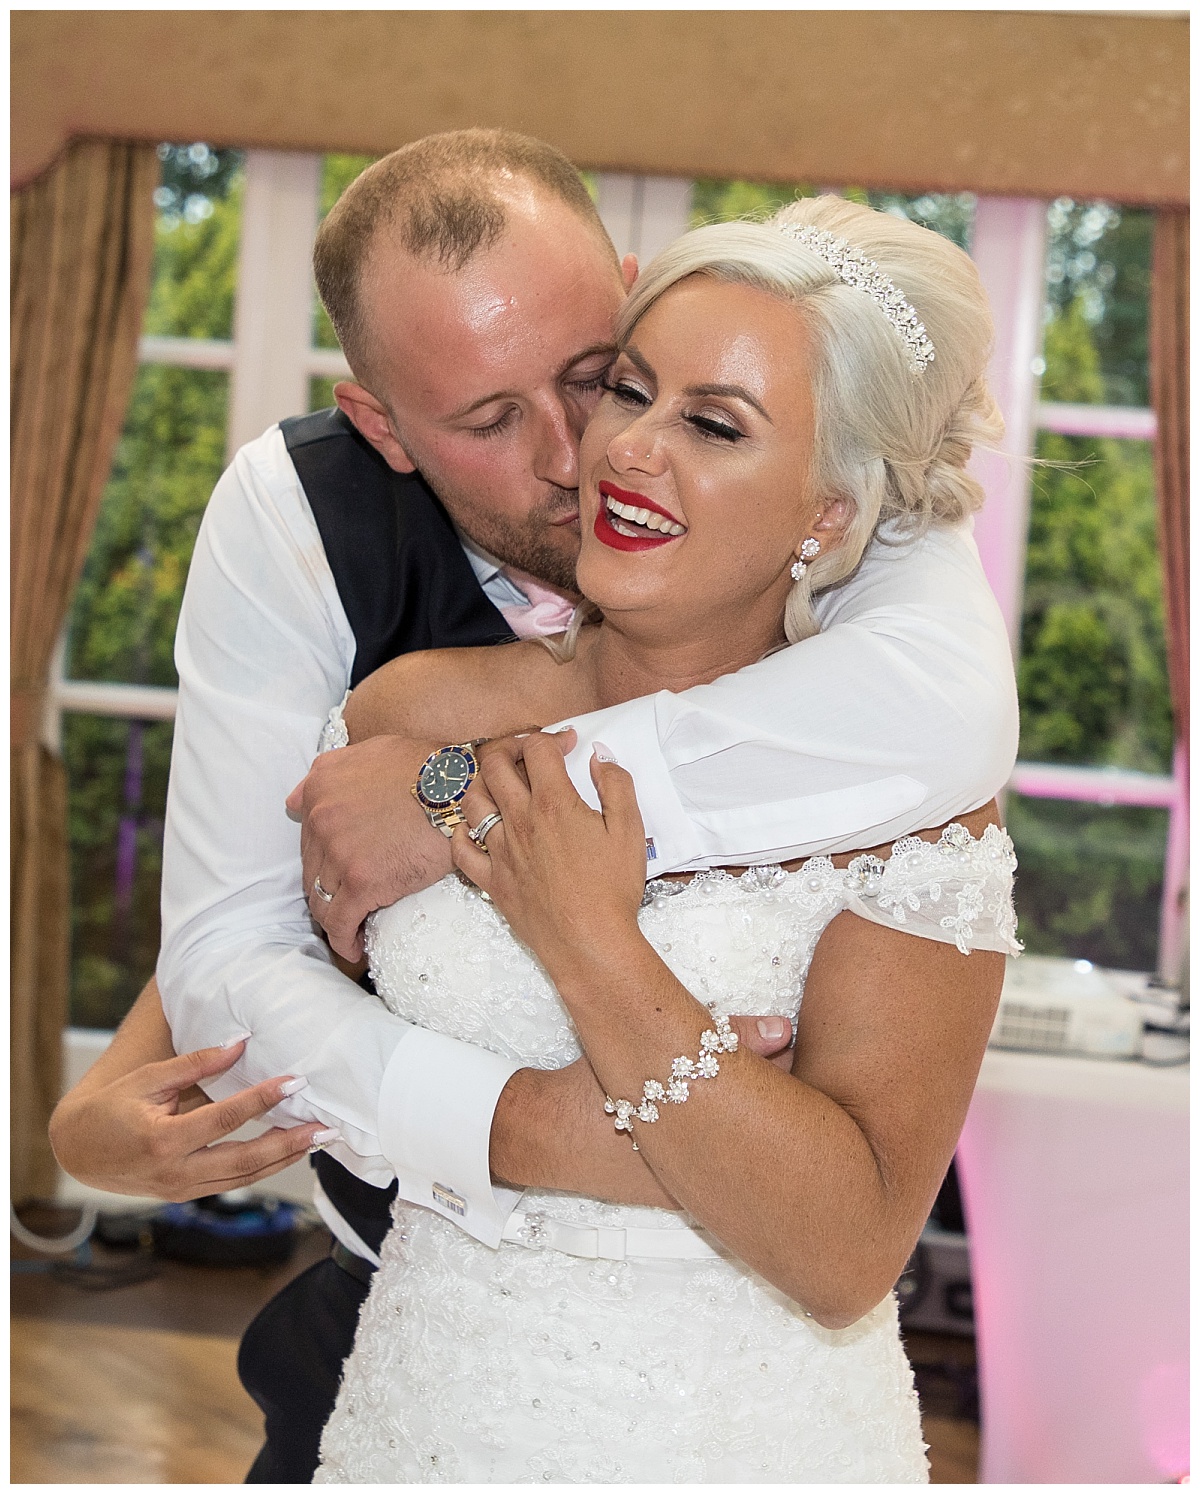 Wedding Photography Manchester - Paula and Daves Mere Court Hotel Wedding 76